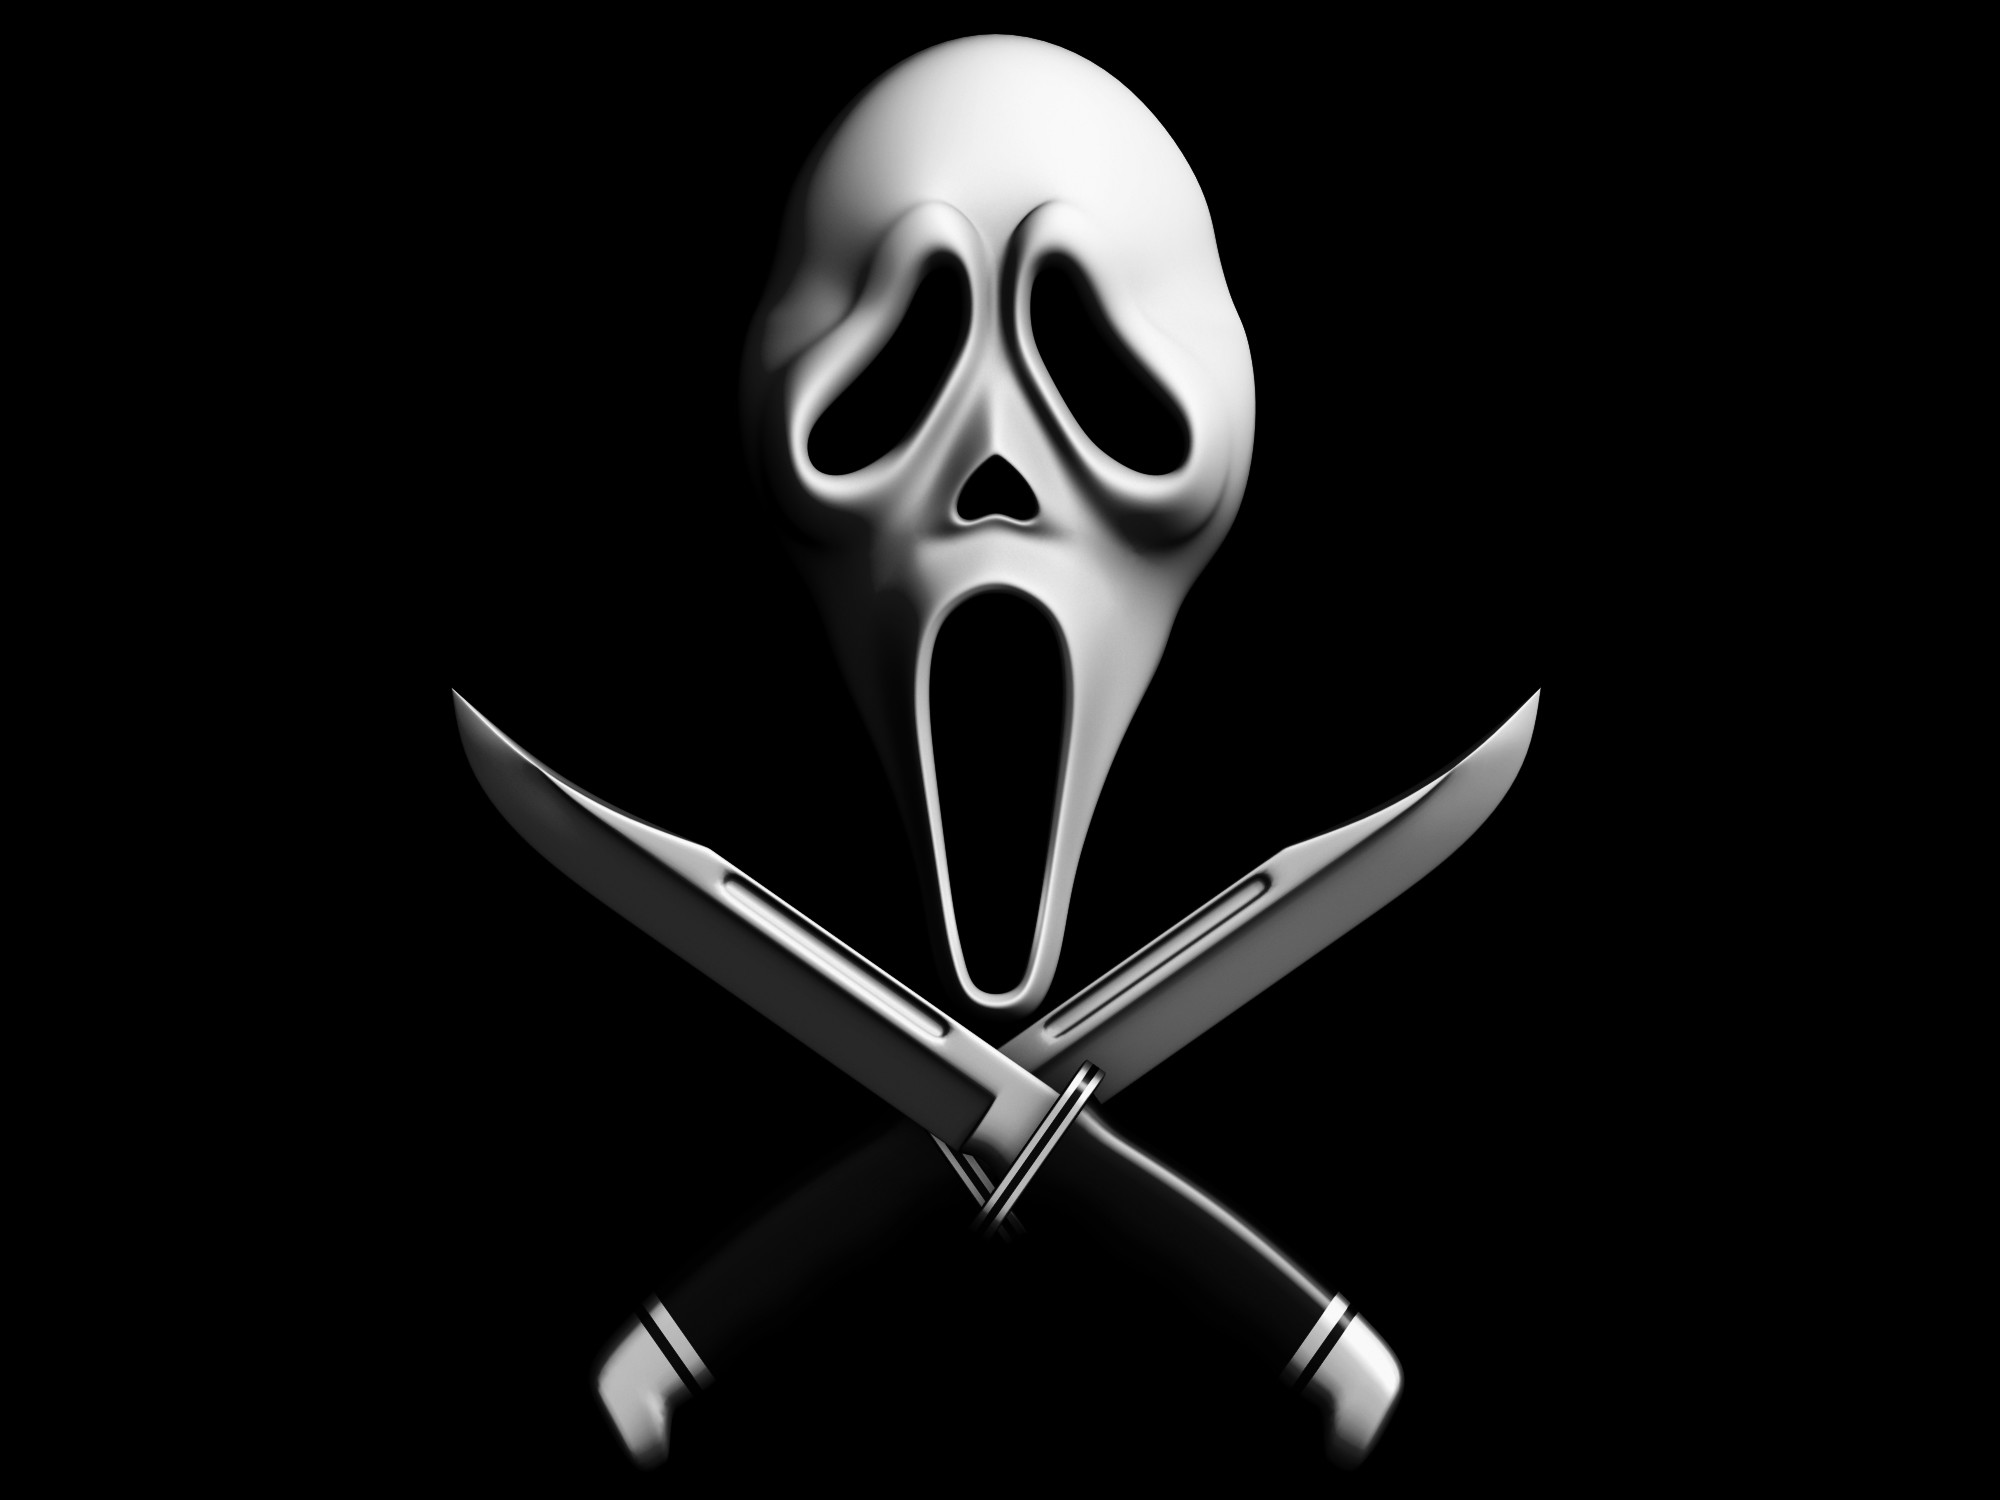 2000x1500 ... Scream images Ghostface in Scream 1-4 wallpaper and background .